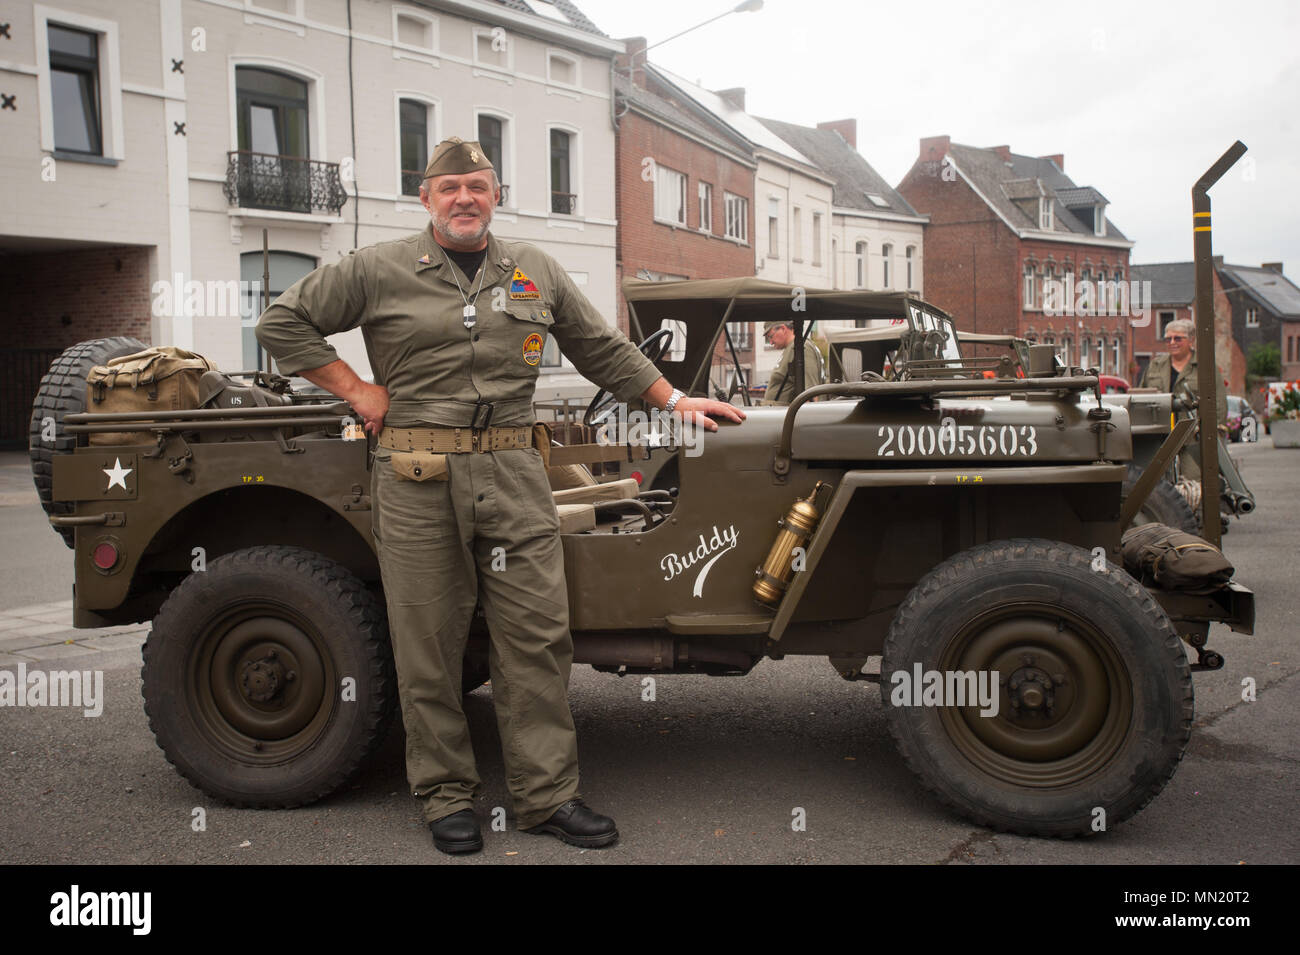 A reenactor poses with a historical vehicle during the memorial ceremony for Belgian Lt. Col. Joseph Daumerie, Aug. 15, 2017, Brugelette, Belgium. The memorial commemorates the 75th anniversary of Daumerie's death. Daumerie is a war hero and fighter pilot who was executed in 1942 during World War II. The event offered a unique opportunity for the U.S. service members to honor a fallen hero and strengthen their relationship with NATO allies during the U.S. Army Garrison Benelux's 50th anniversary in Belgium. (U.S. Navy Photo by Information System Technician Seaman Daniel Gallegos/Released) Stock Photo